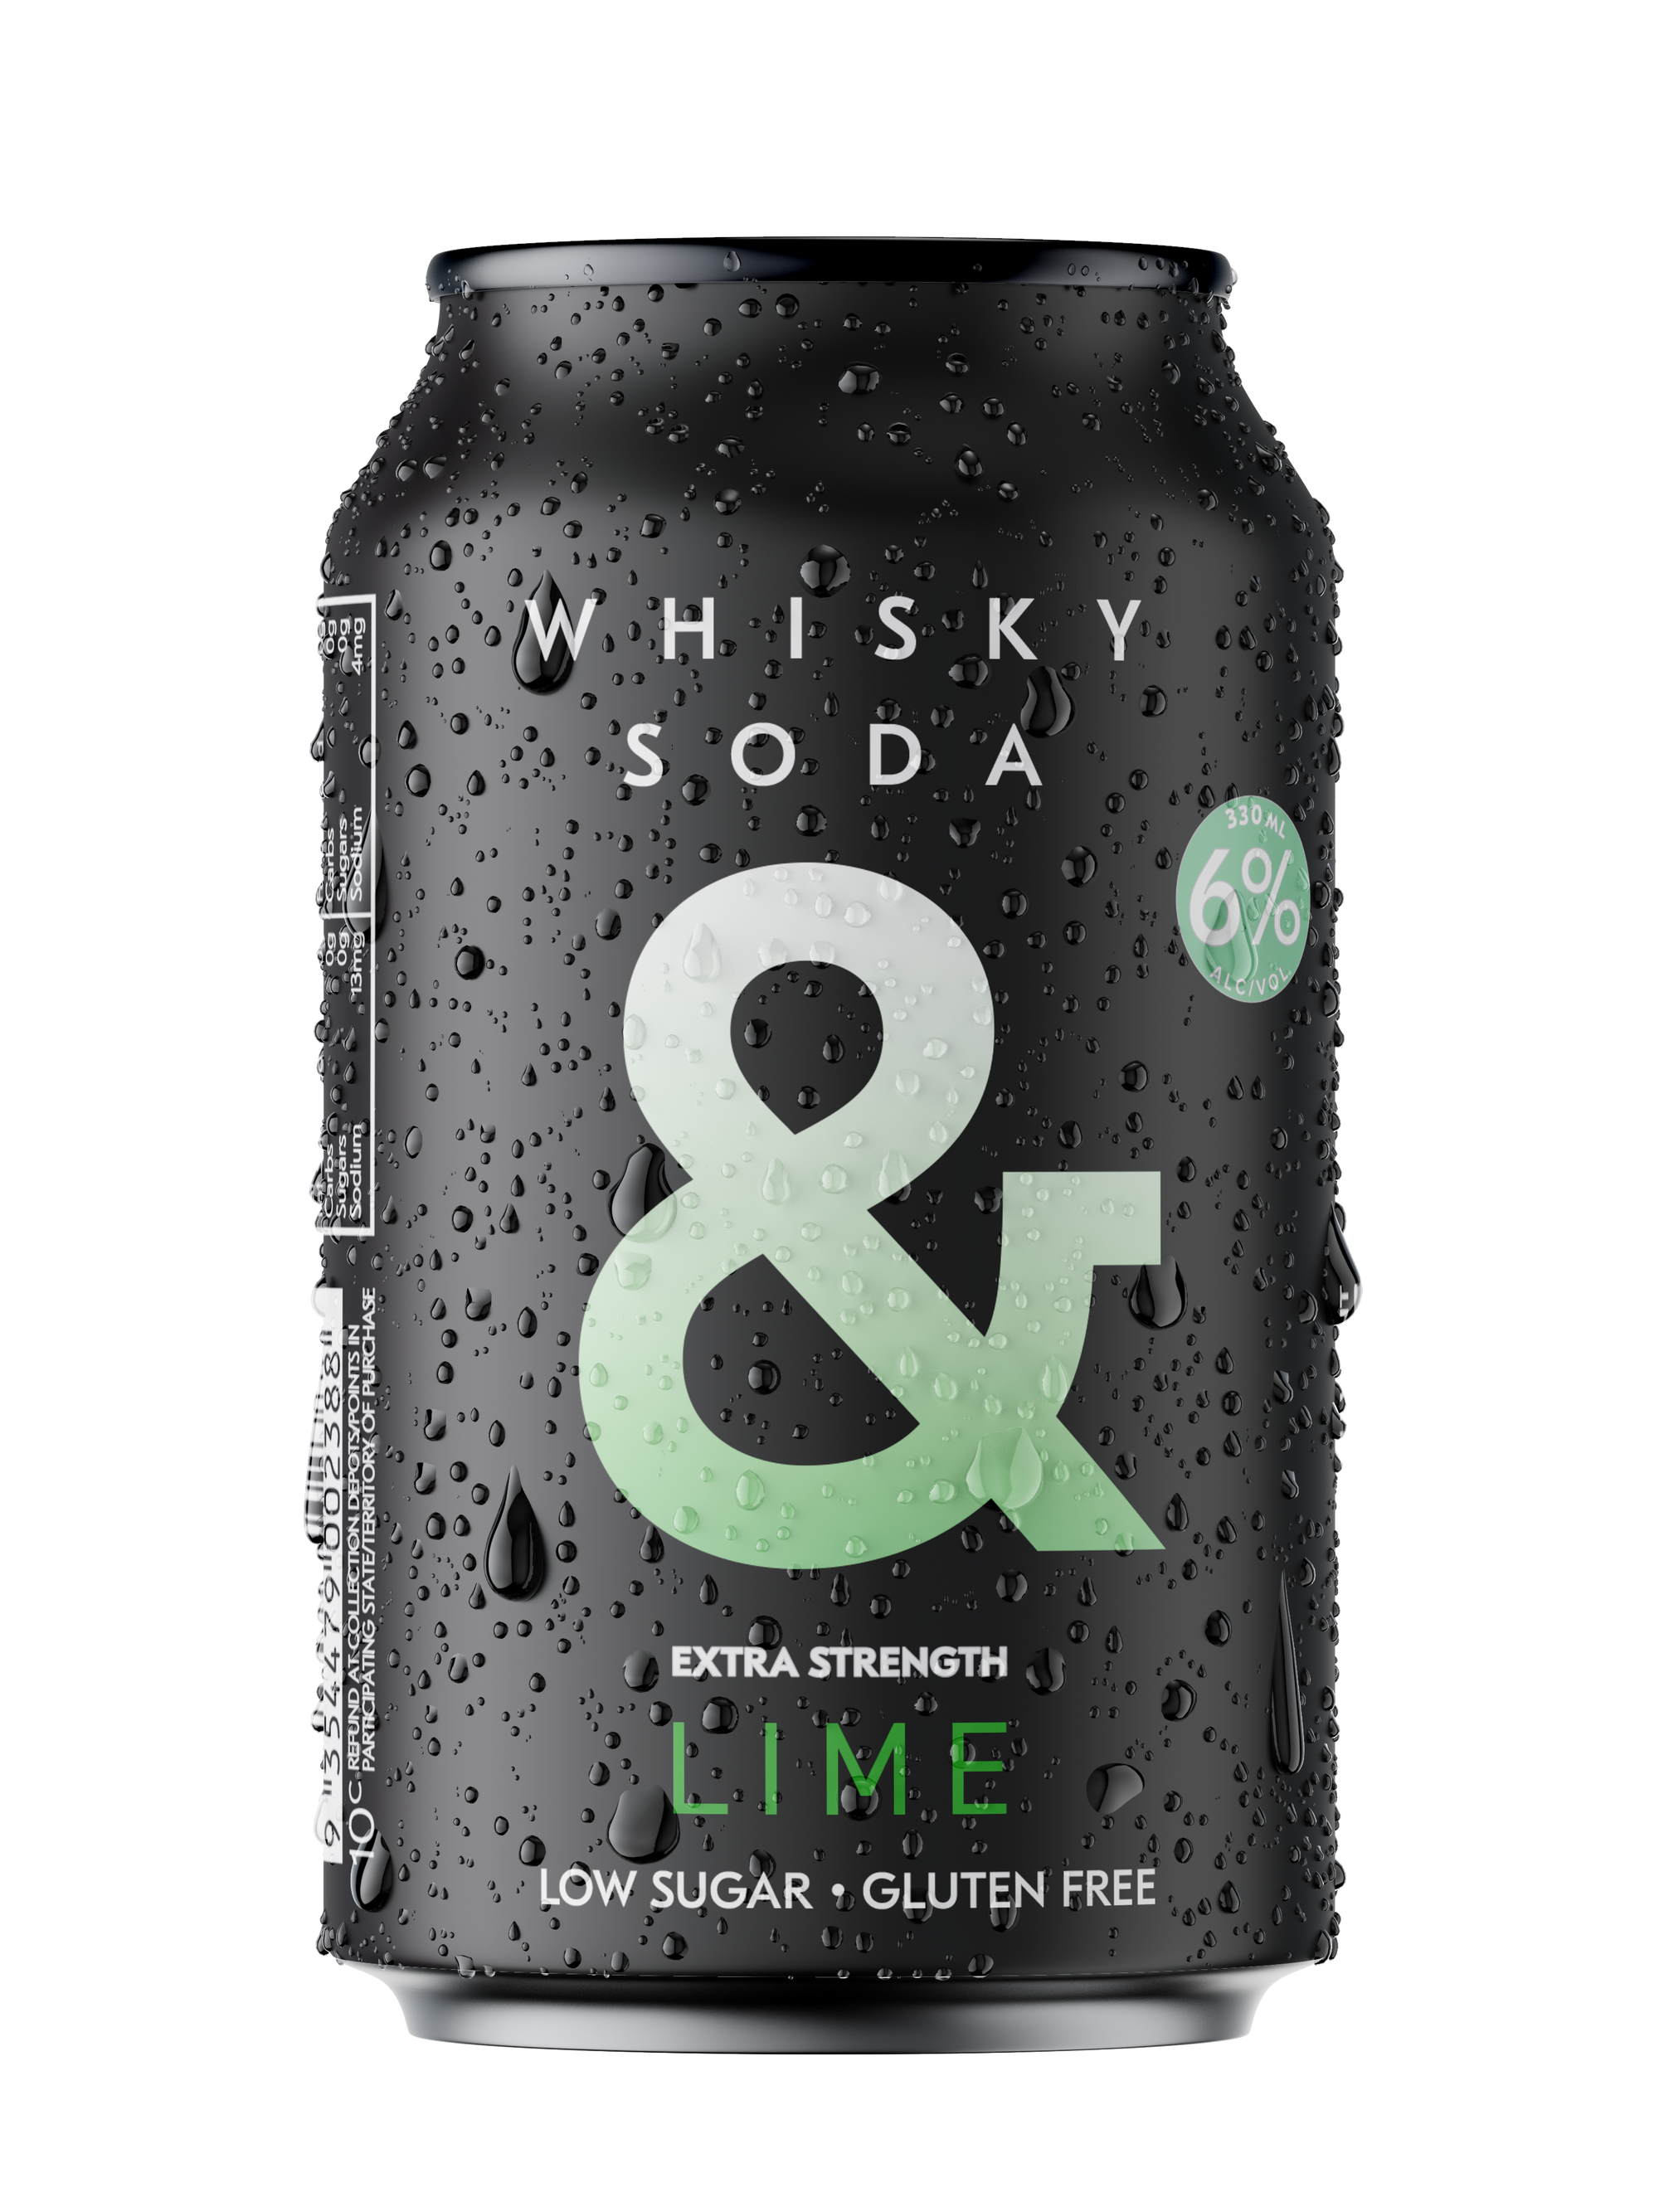 Whisky Soda & Lime Cans 6% (16 Pack)